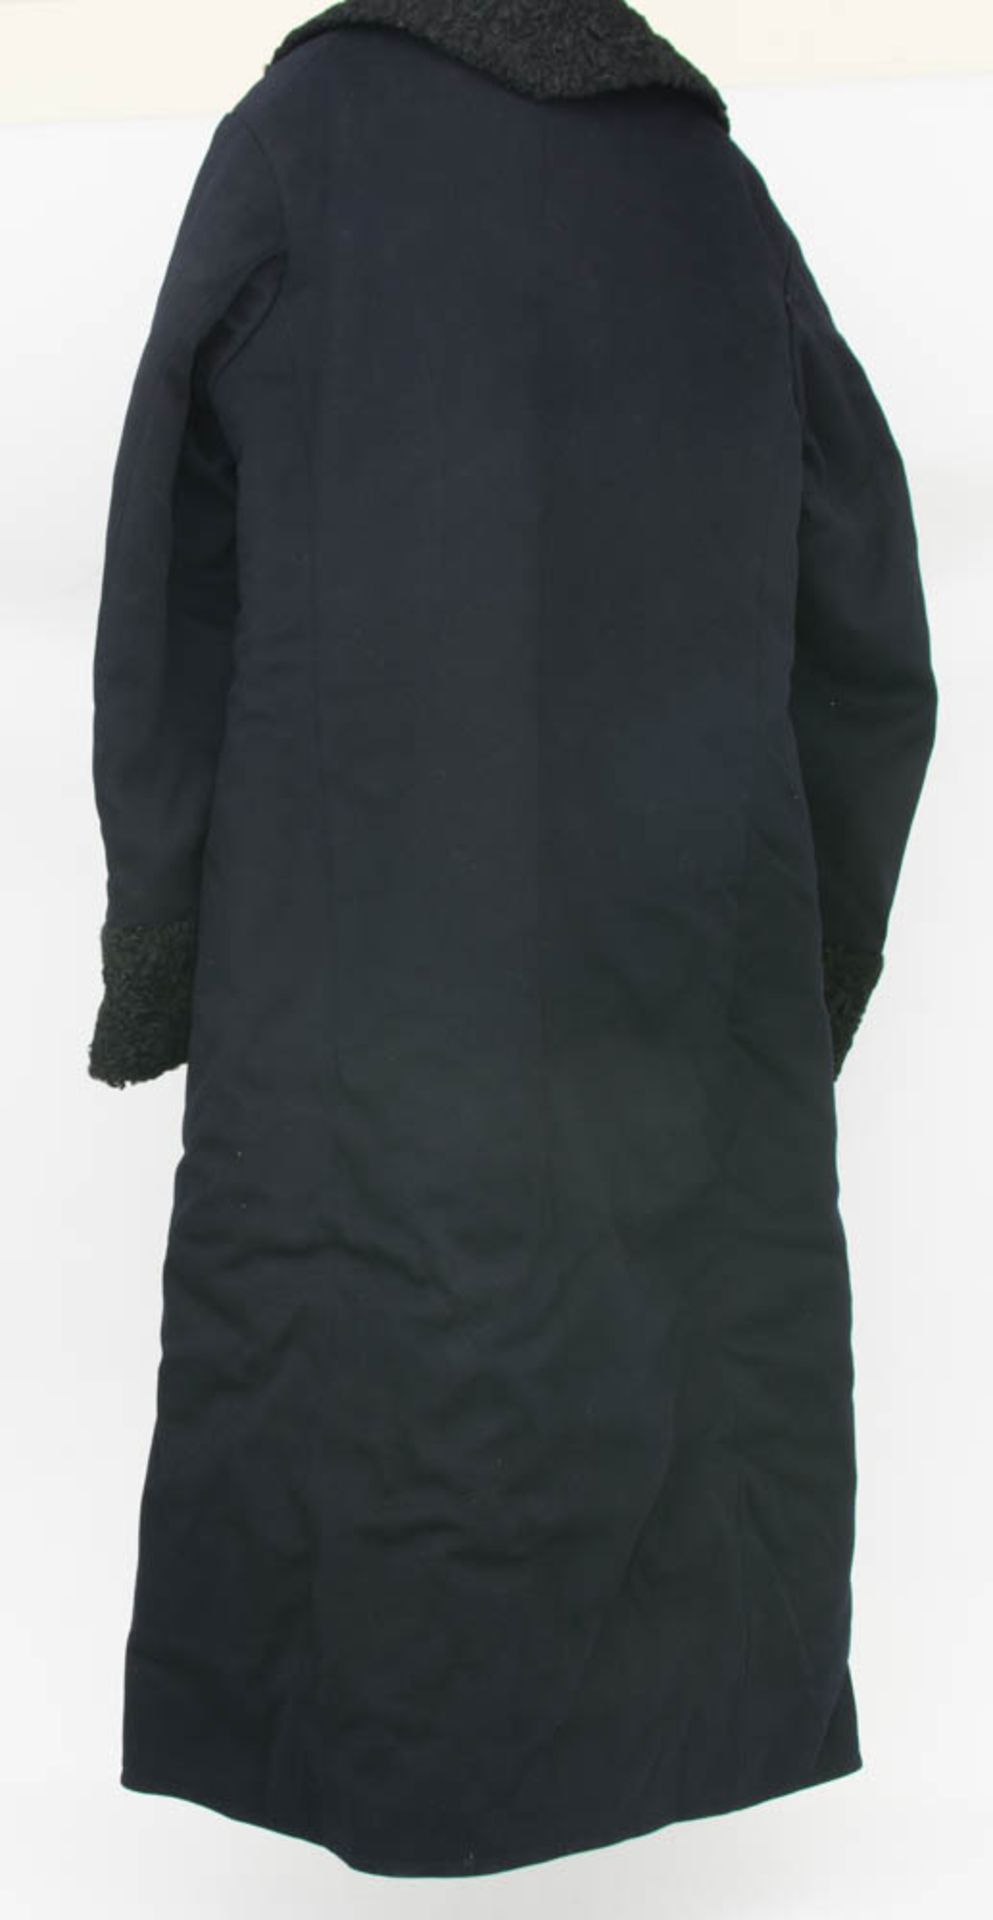 Historical coachman coat, late 19th c. - Image 6 of 7